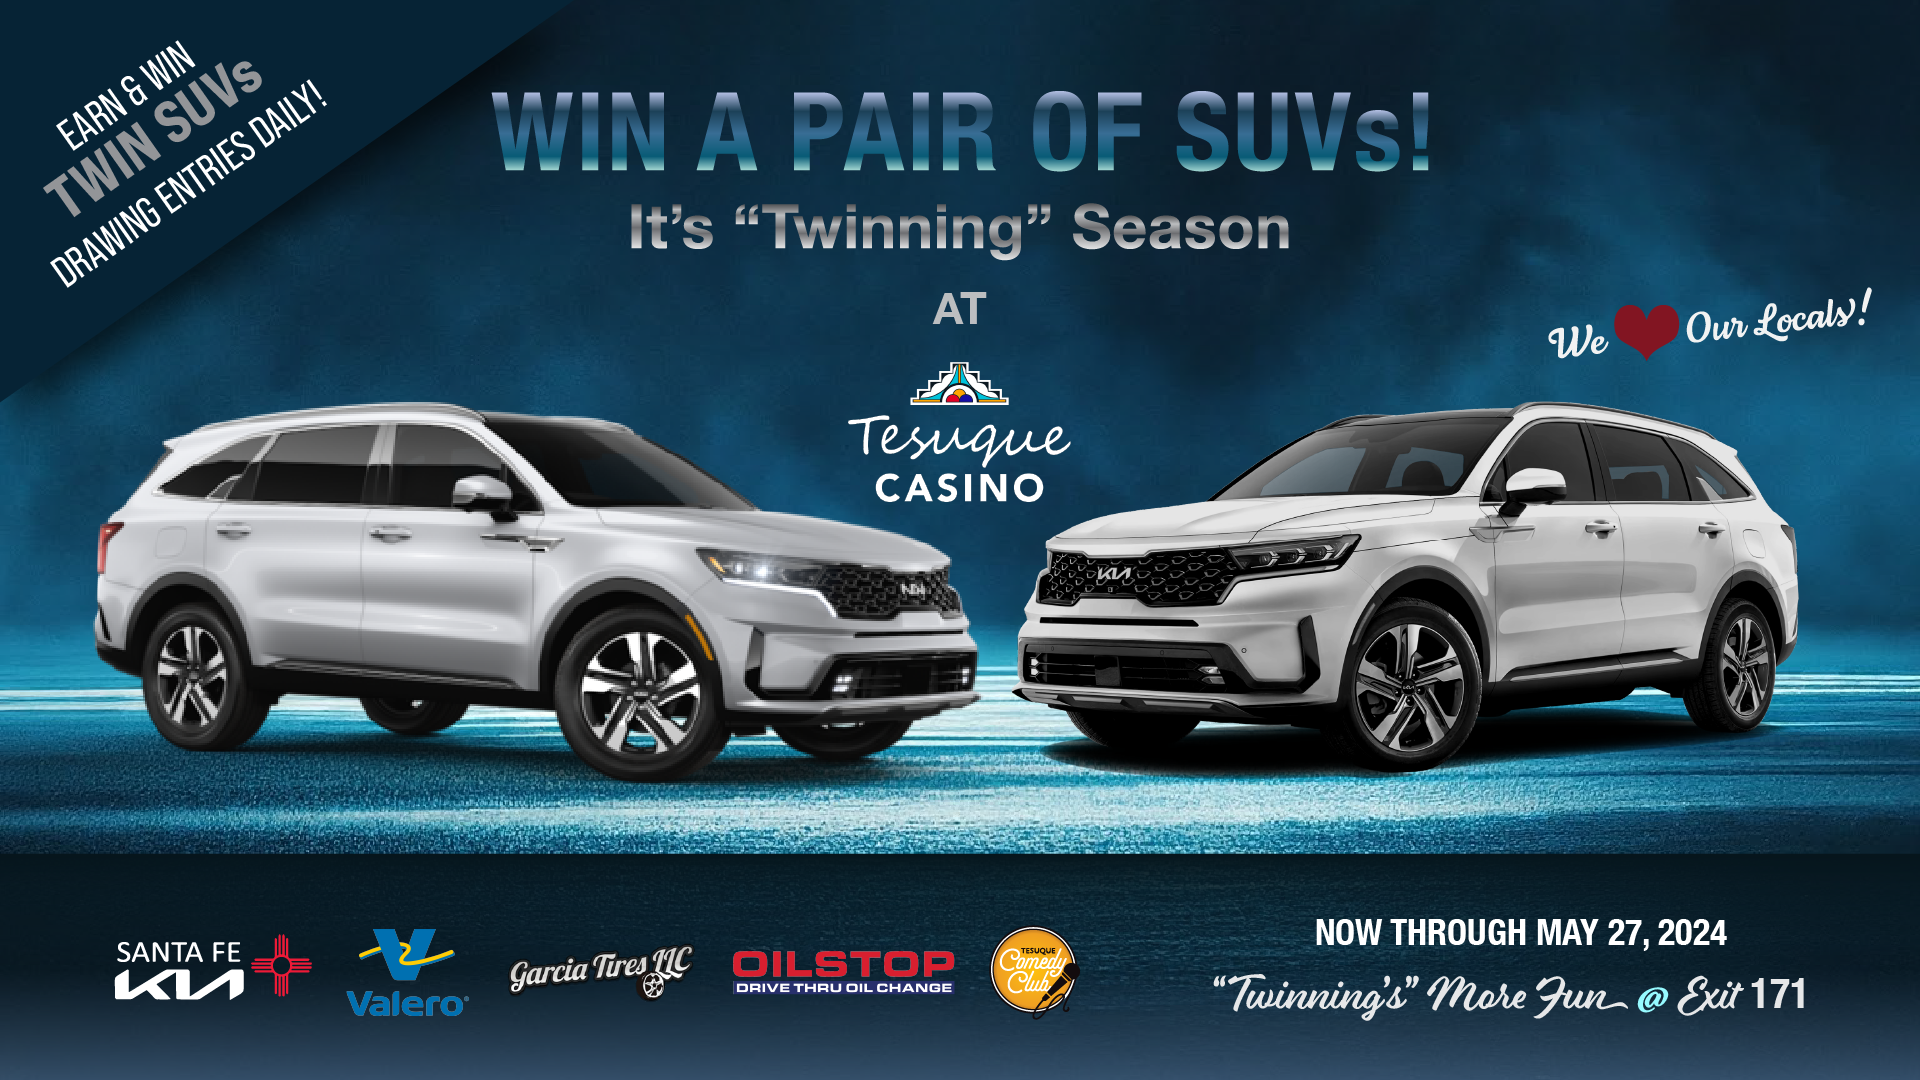 Win a pair of SUVs! It's "Twinning" Season, drawing entries daily! Now through May 27th, 2024